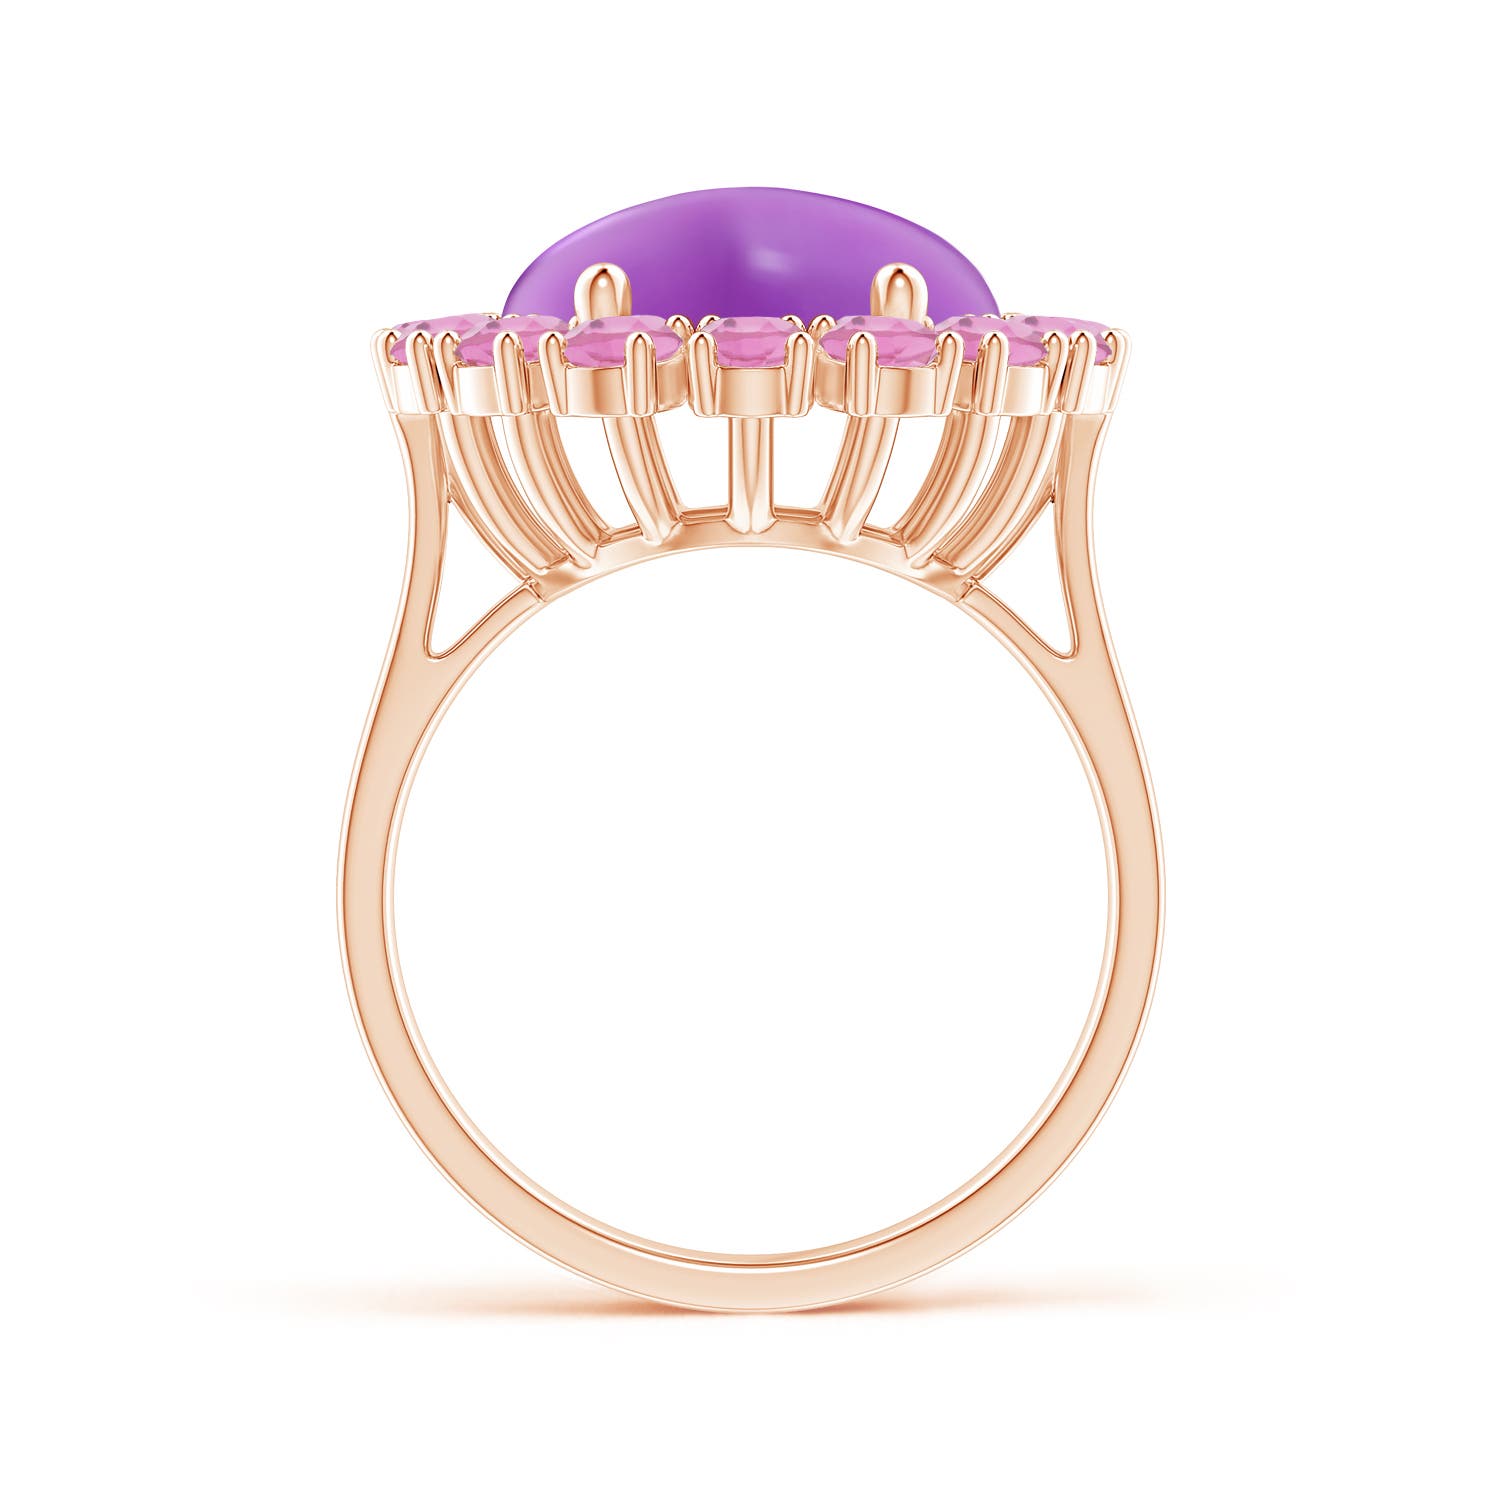 AA - Amethyst / 10.26 CT / 14 KT Rose Gold